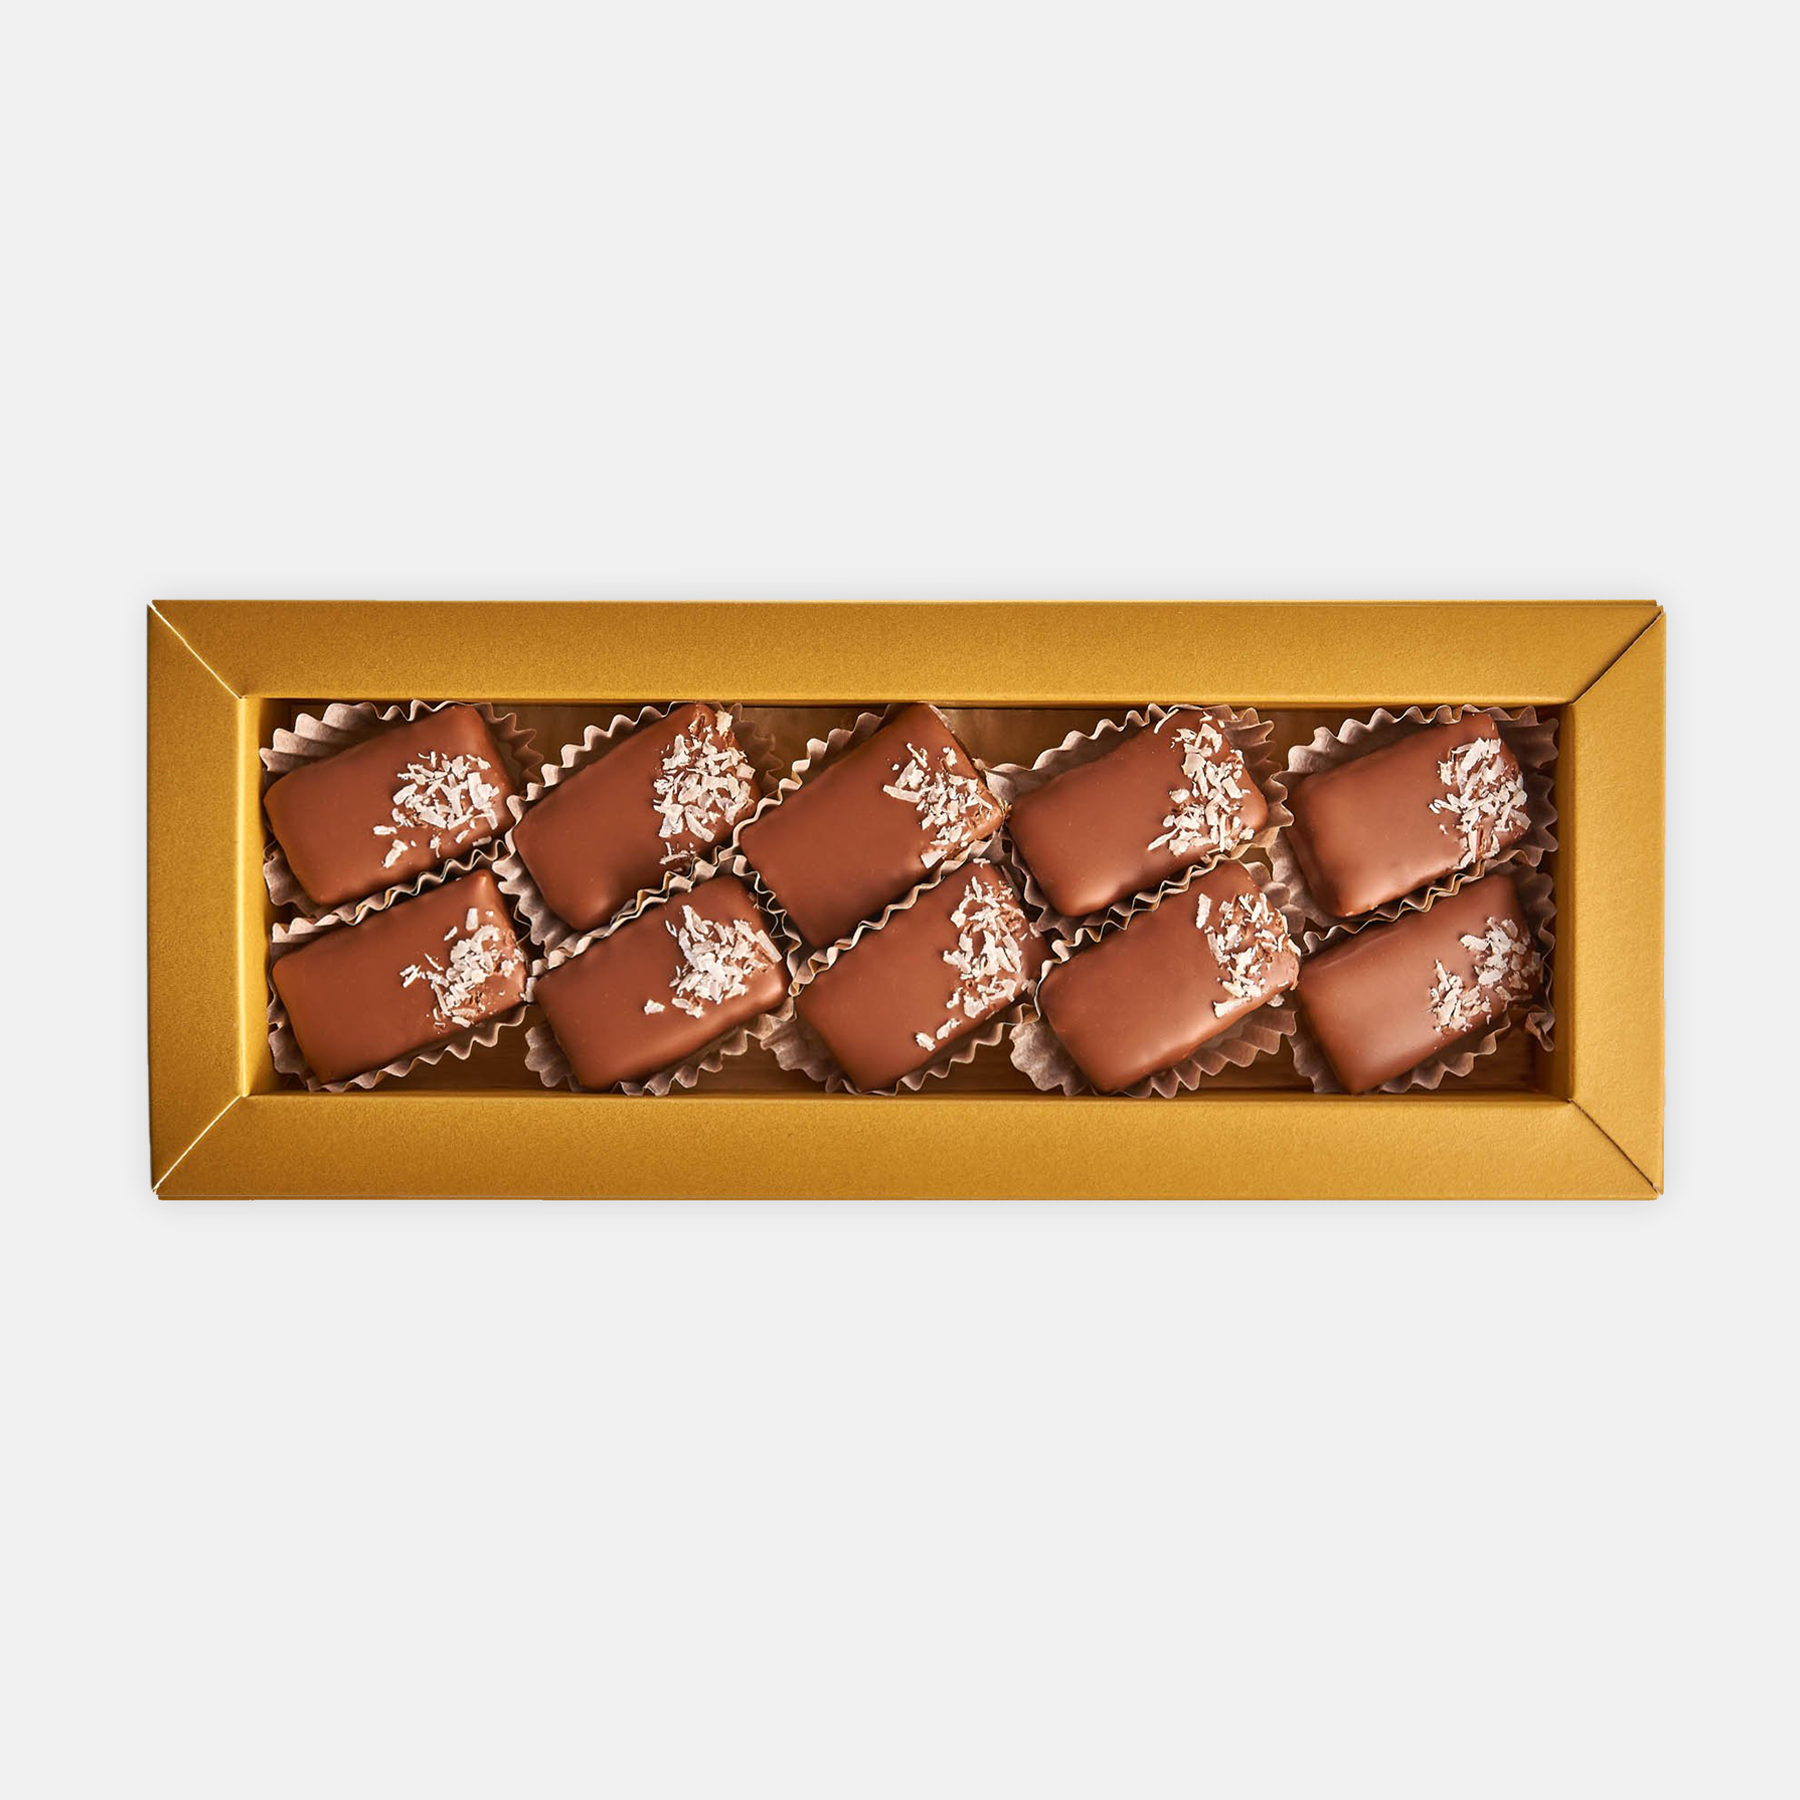 Milk chocolate bonbons with coconut filling